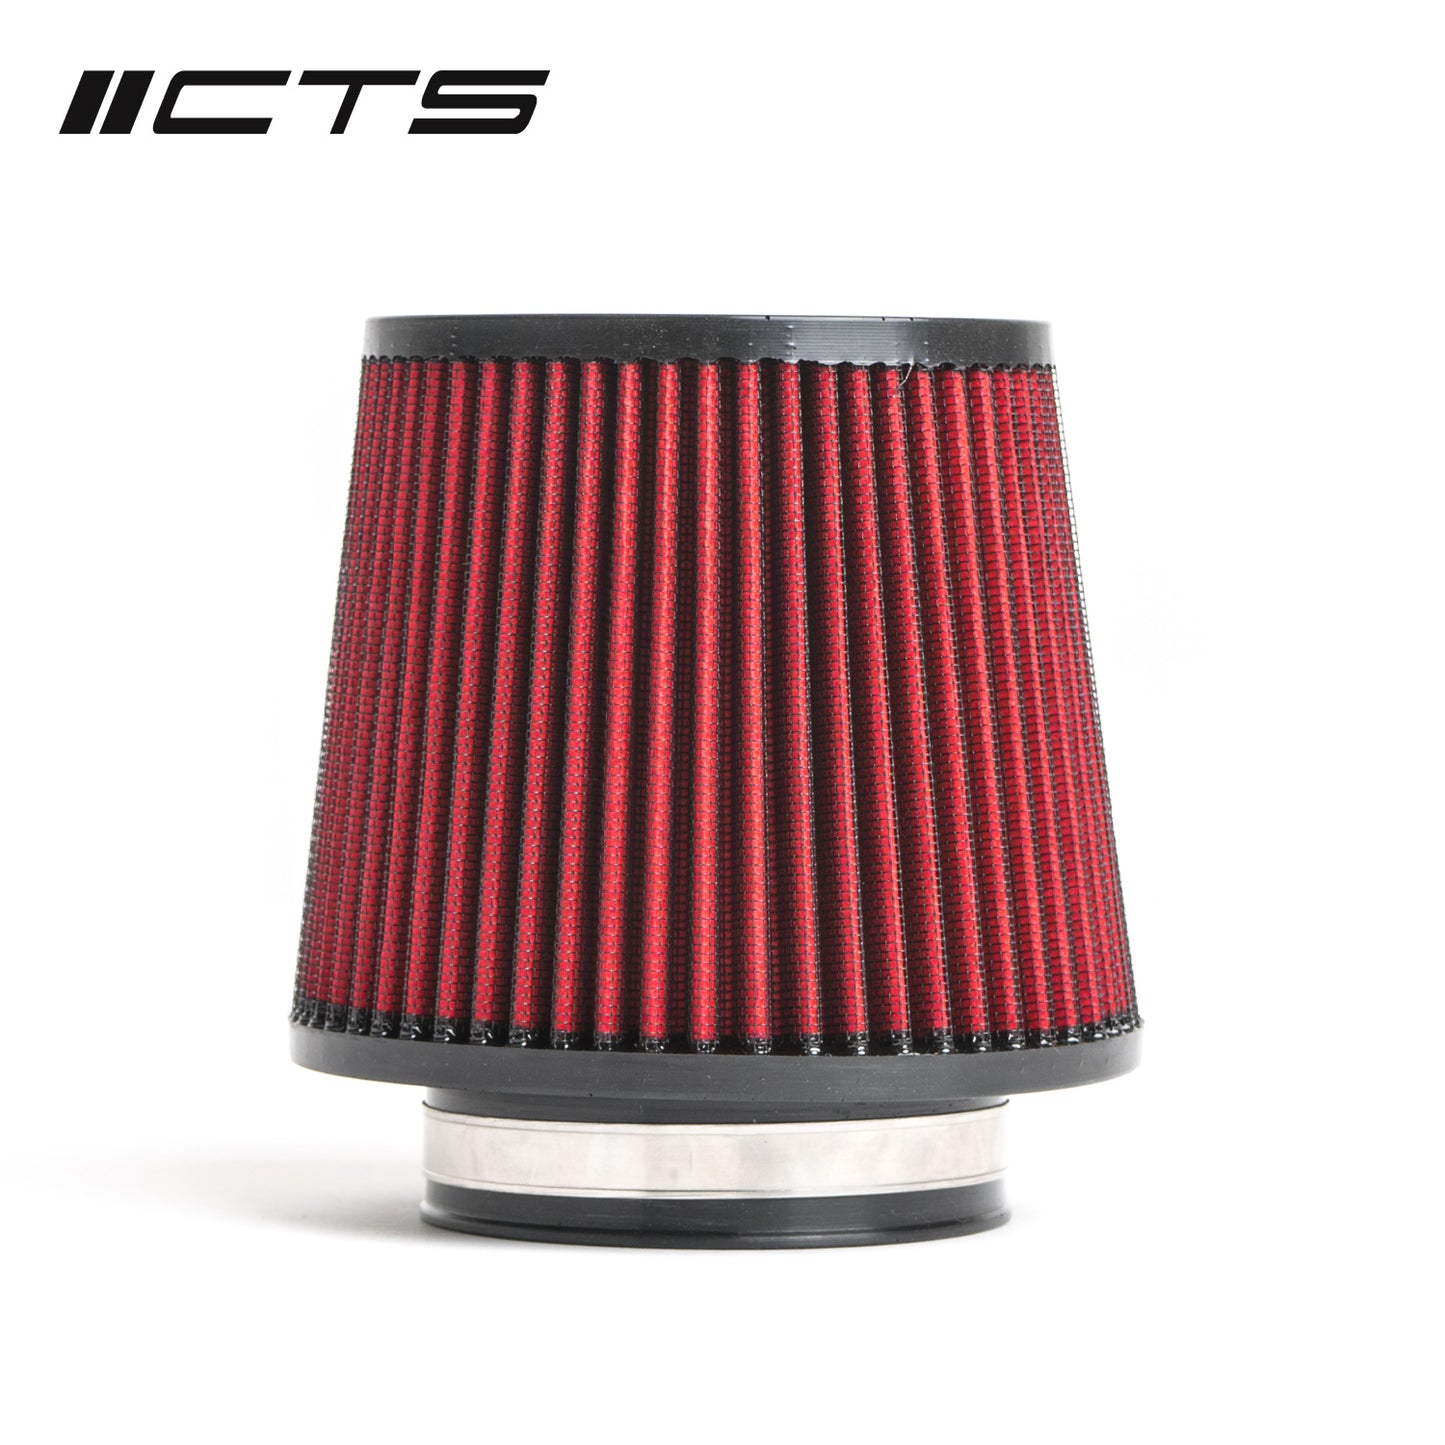 CTS Turbo Audi VW Replacement 3.5″ Air Filter for CTS-IT-270/270R/290/300/180 Intakes (Inc. Golf, TT, S4 & SQ5)